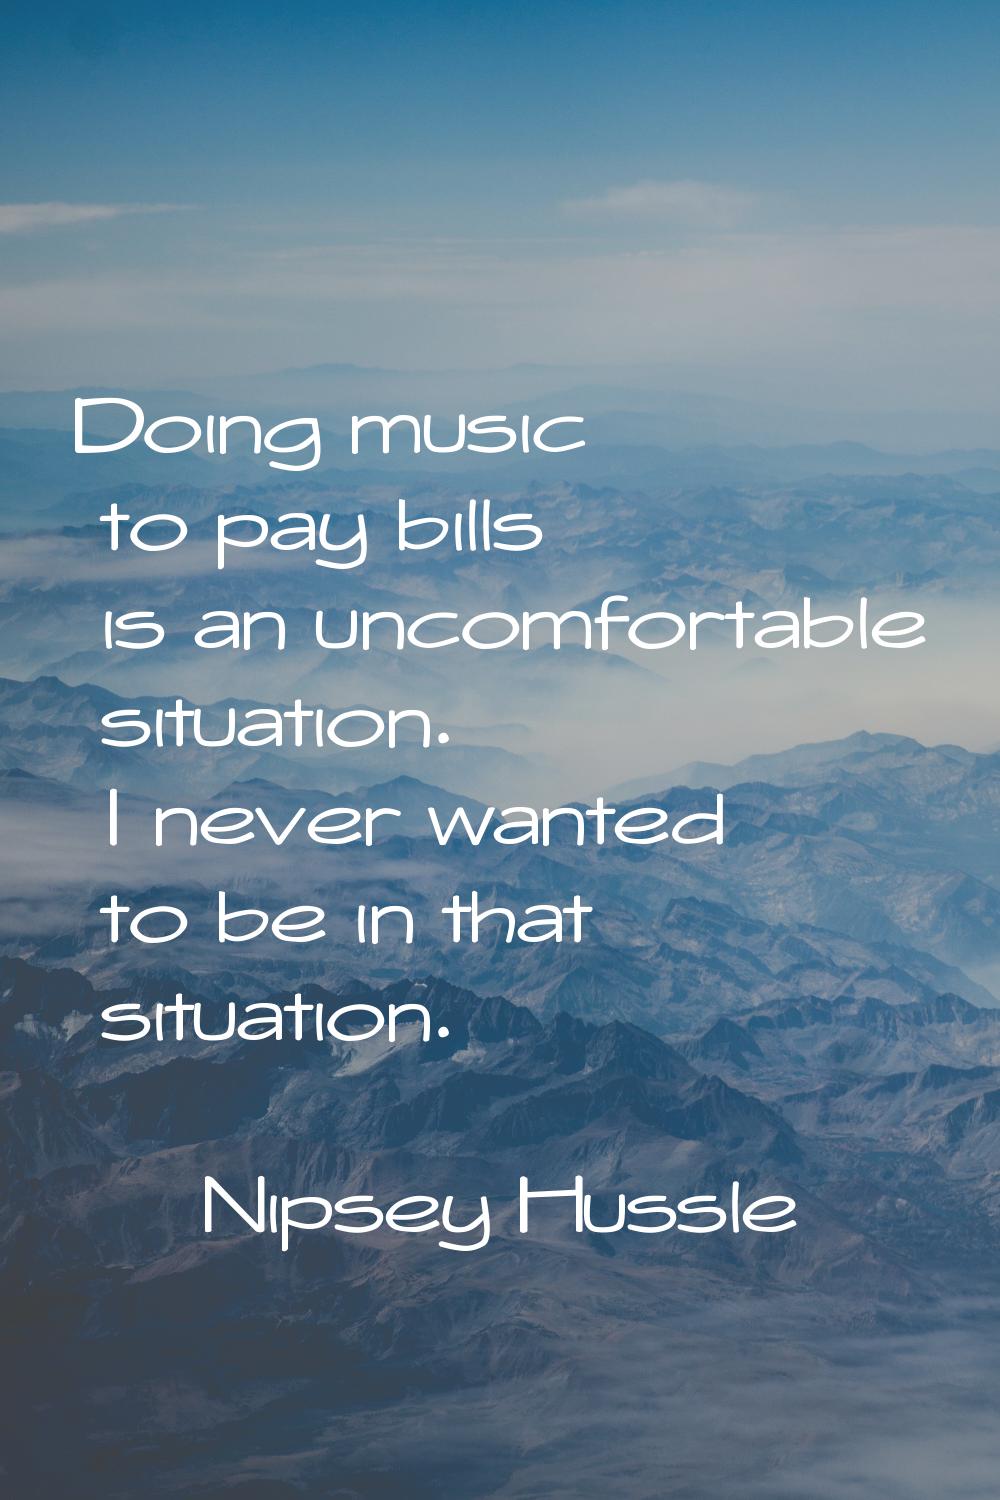 Doing music to pay bills is an uncomfortable situation. I never wanted to be in that situation.